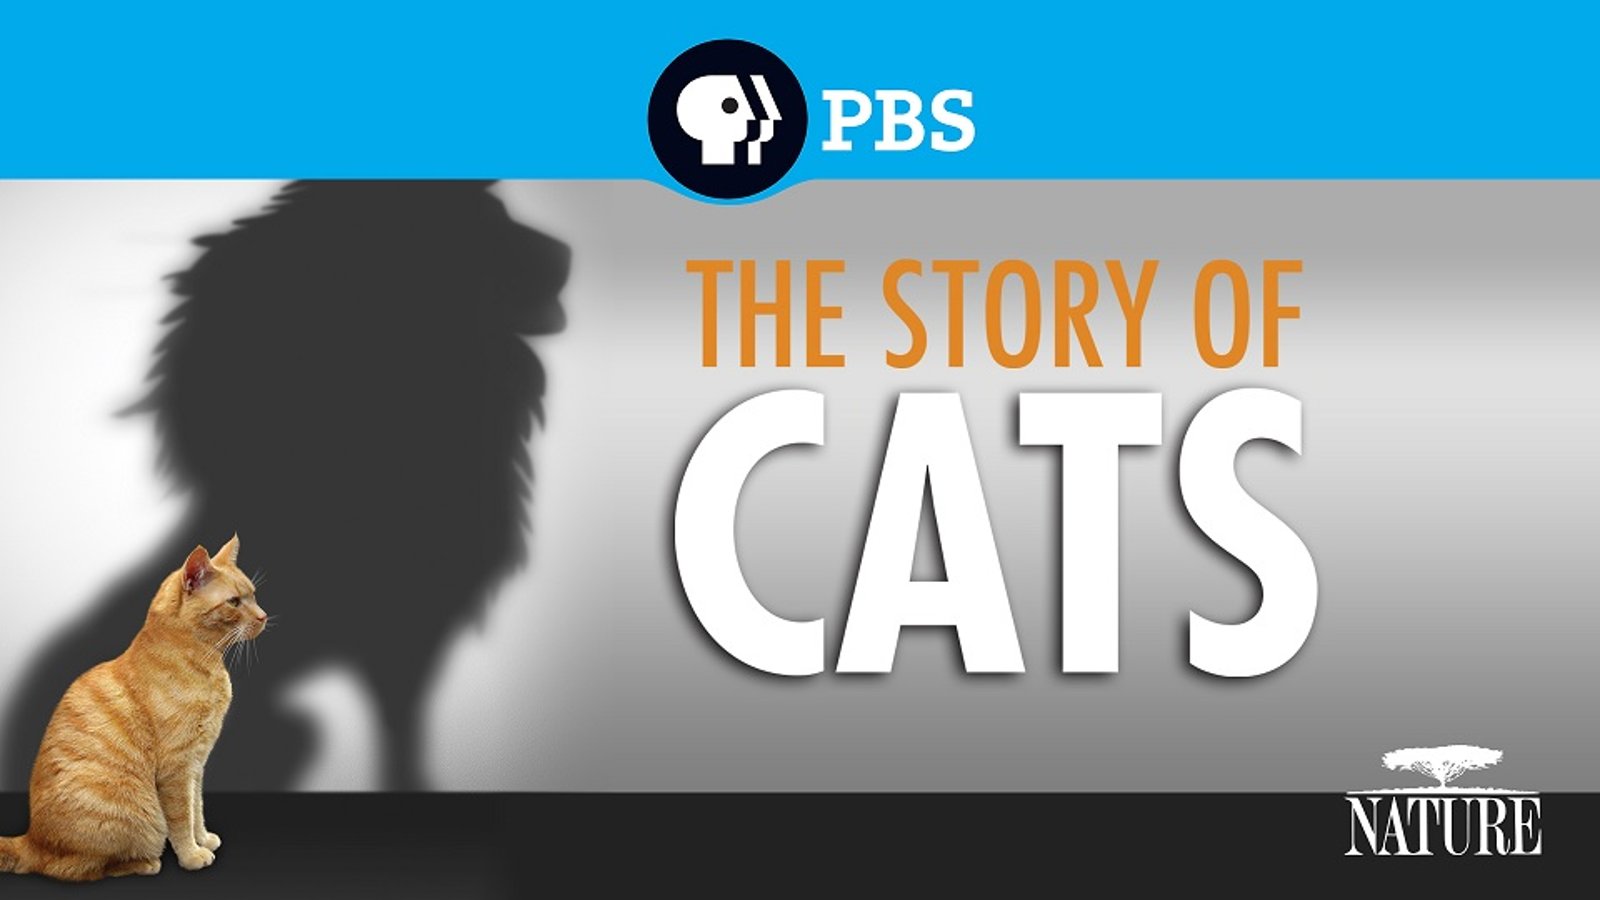 The Story of Cats - The Geological History of Wild Cats